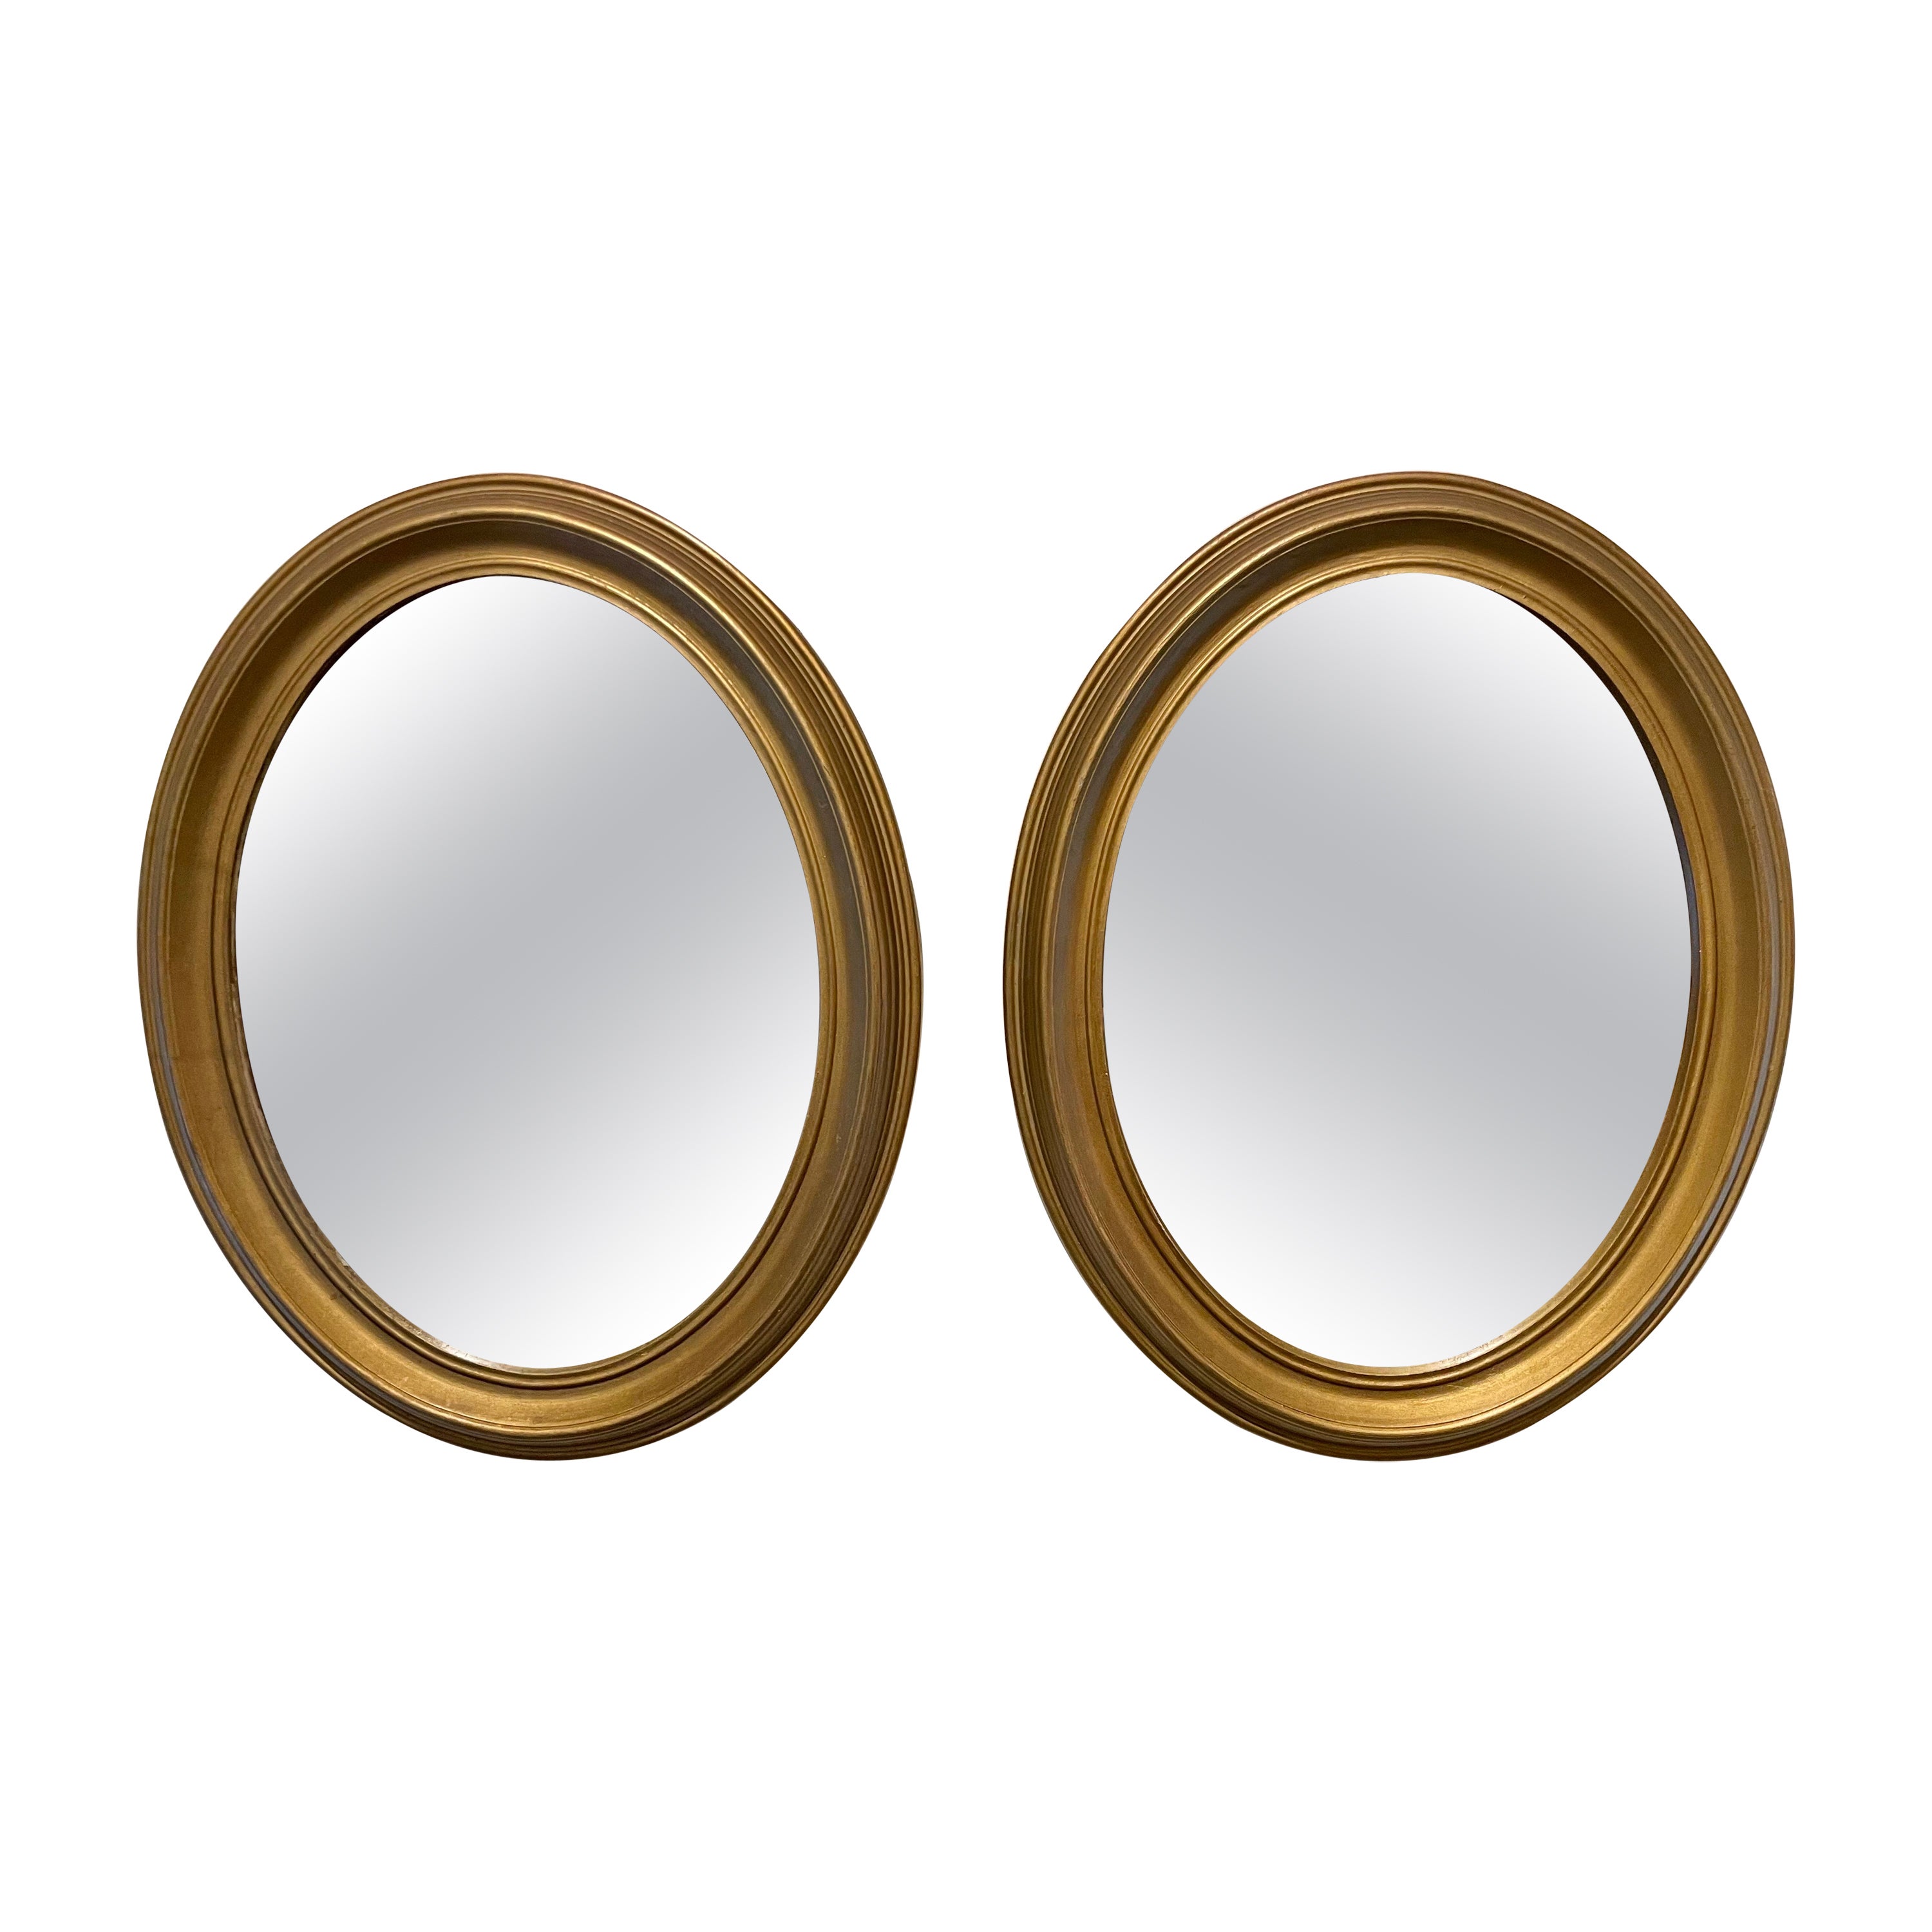 Pair of Vintage Gilt Oval Italian Mirrors For Sale